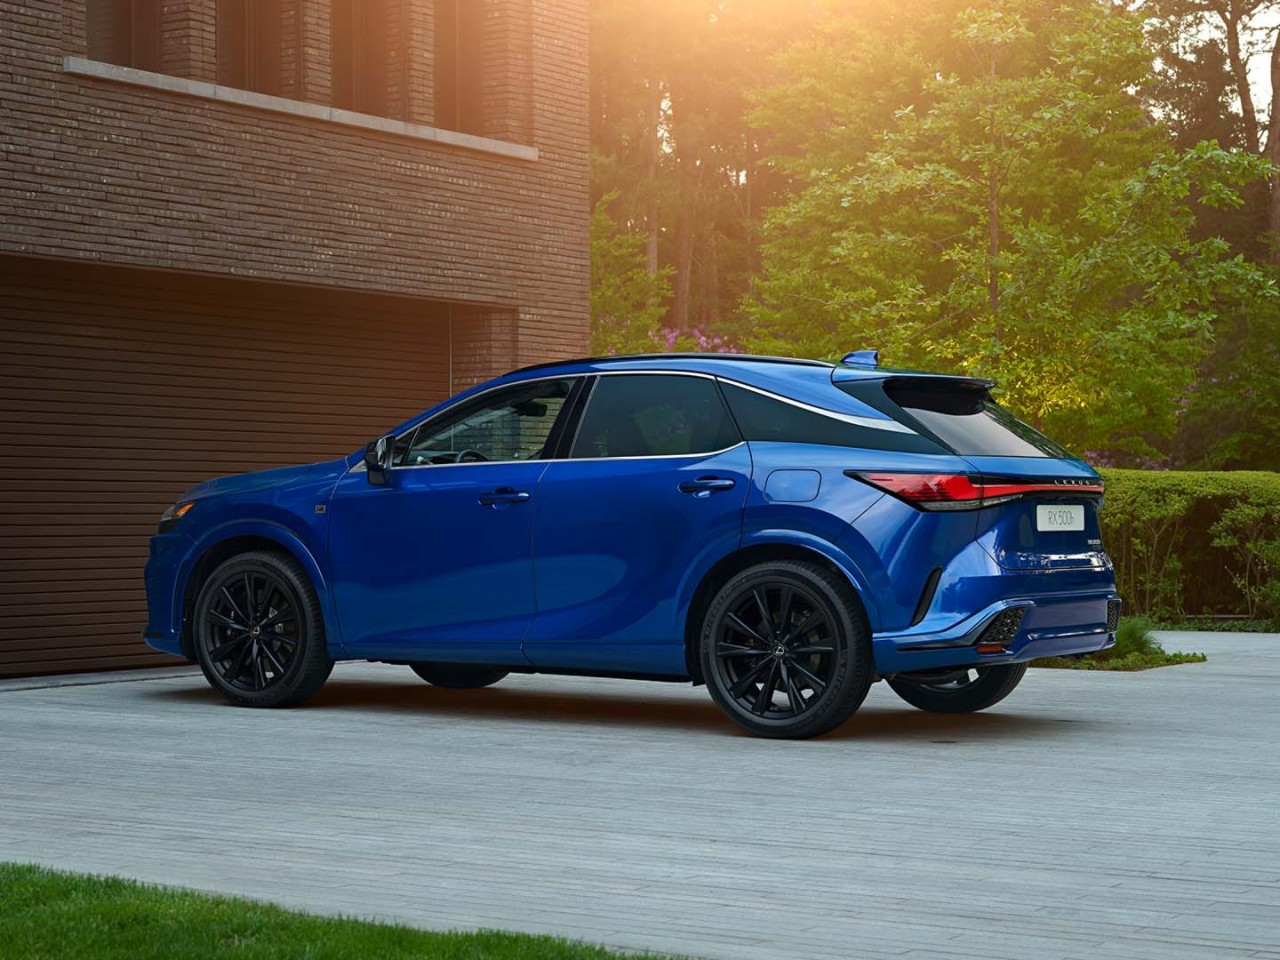 Side view of the Lexus RX 500h parked on a driveway.